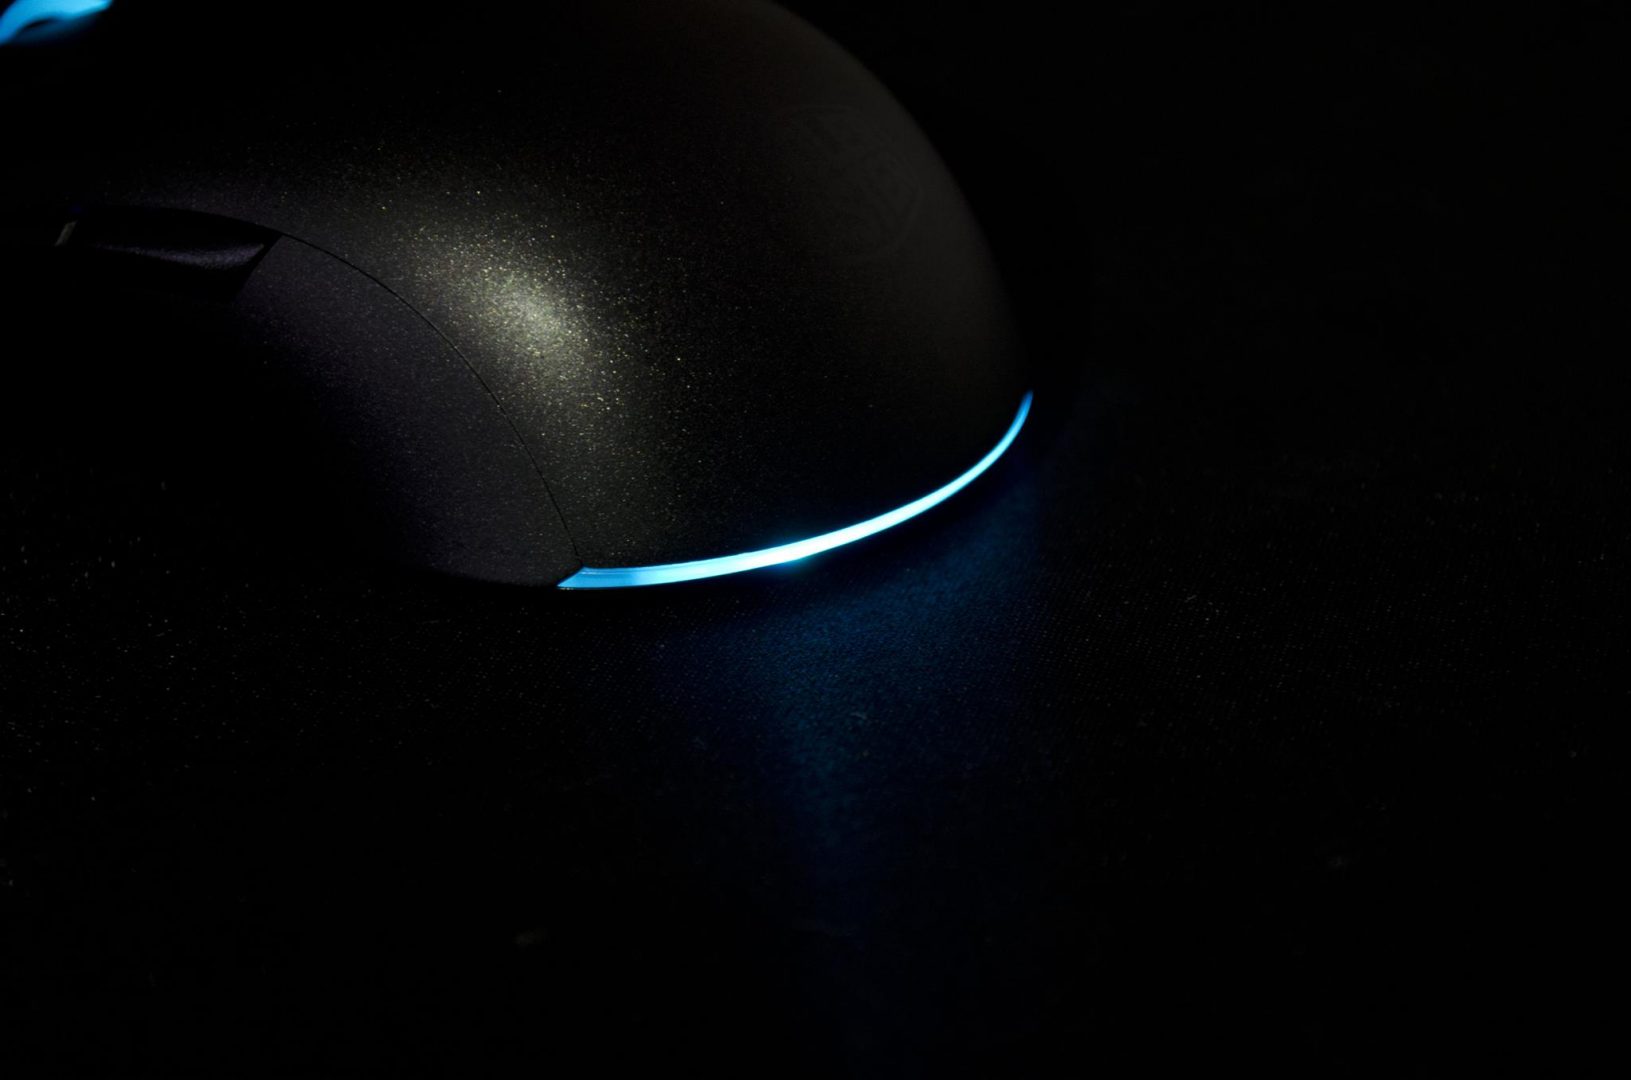 MasterMouse S Gaming Mouse